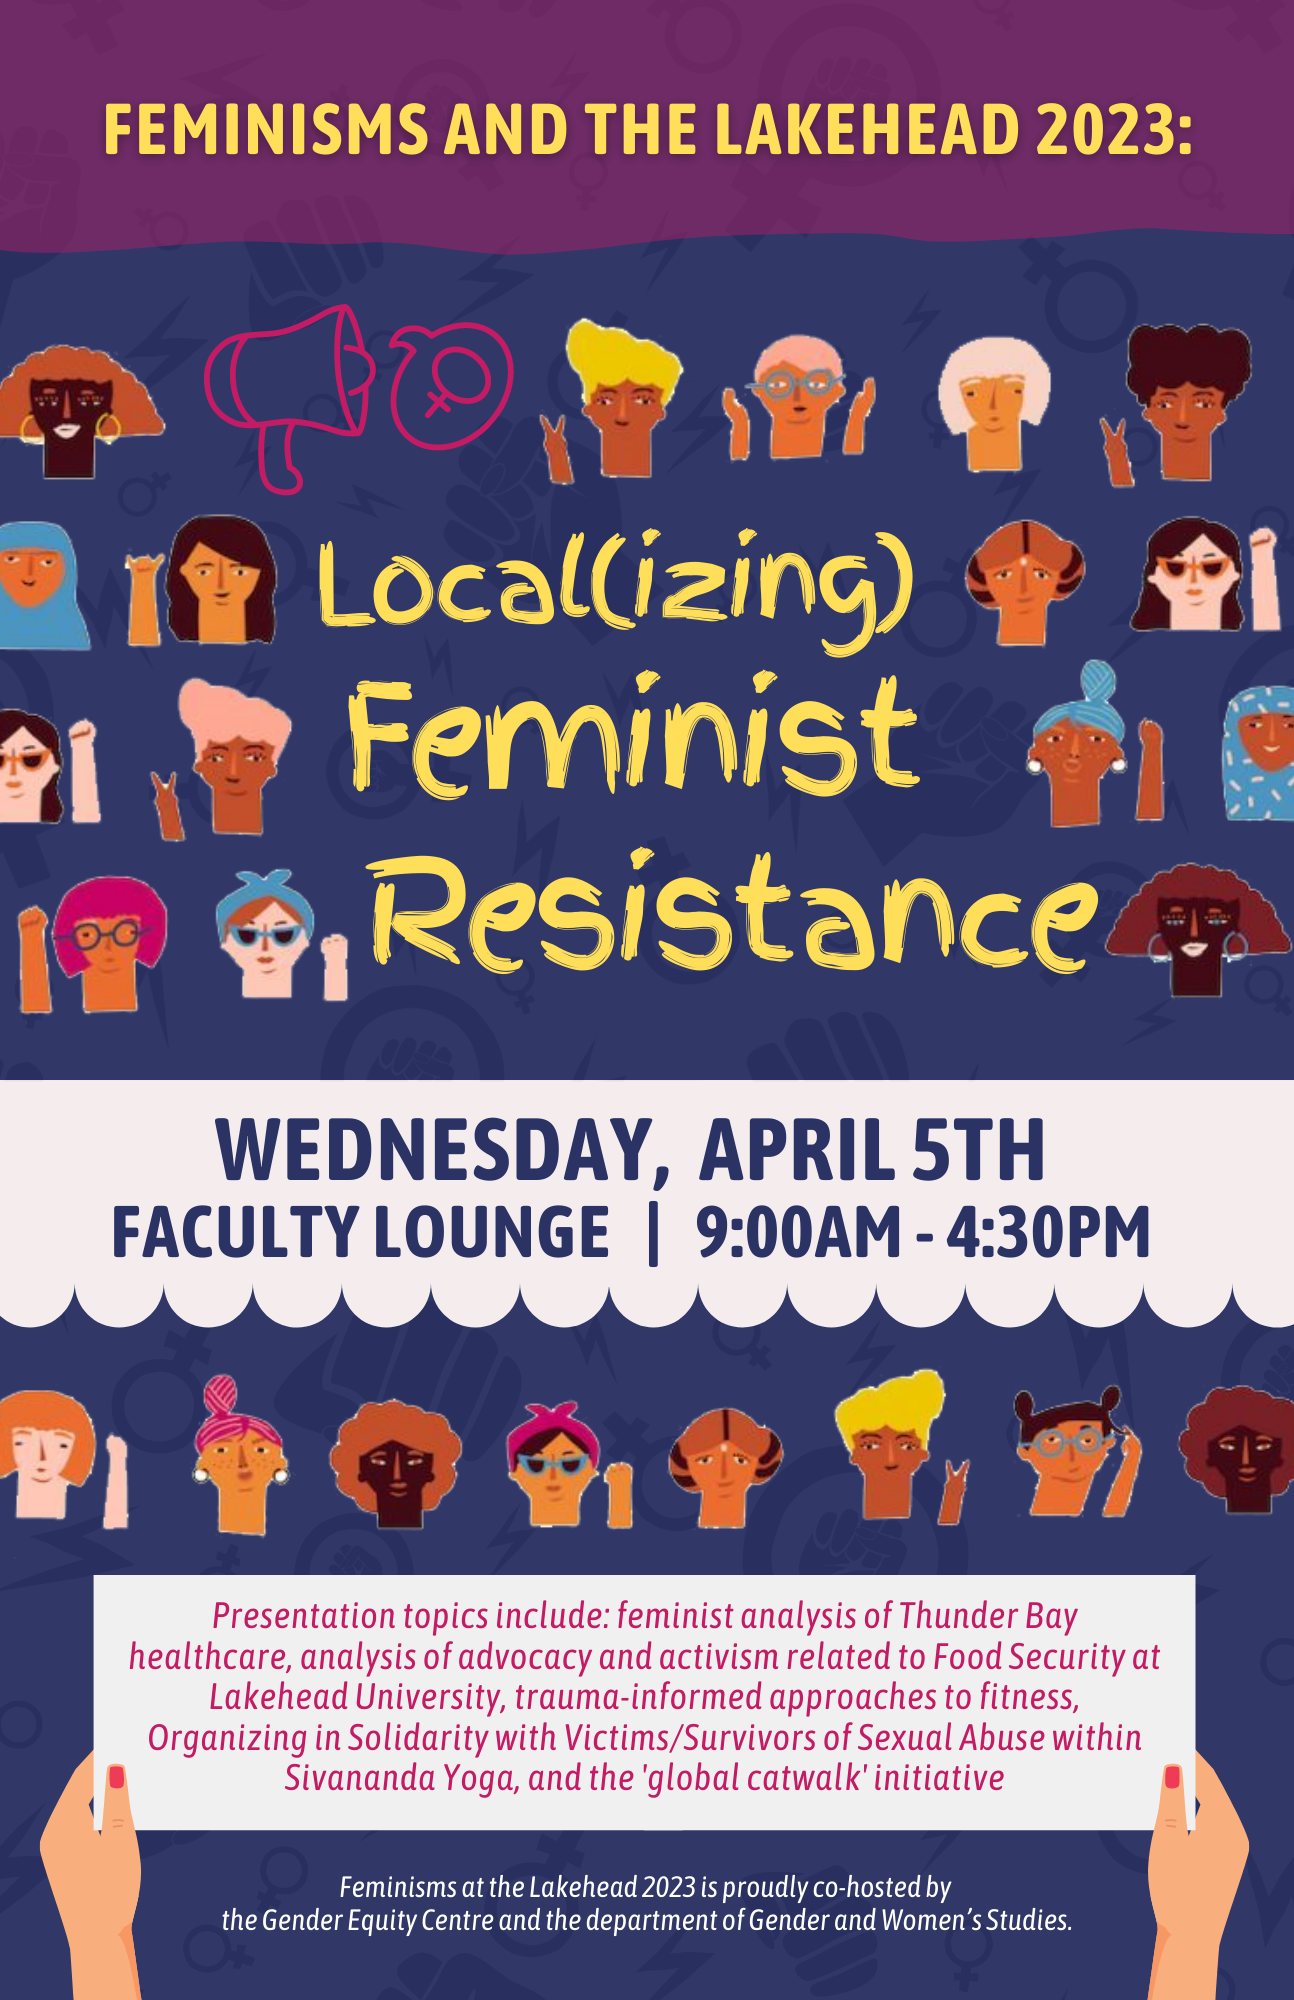 Yellow text reads "Local(izing) Feminist Resistance. Event is April 5, 2023 in the Faculty Lounge from 9am to 4:30pm.